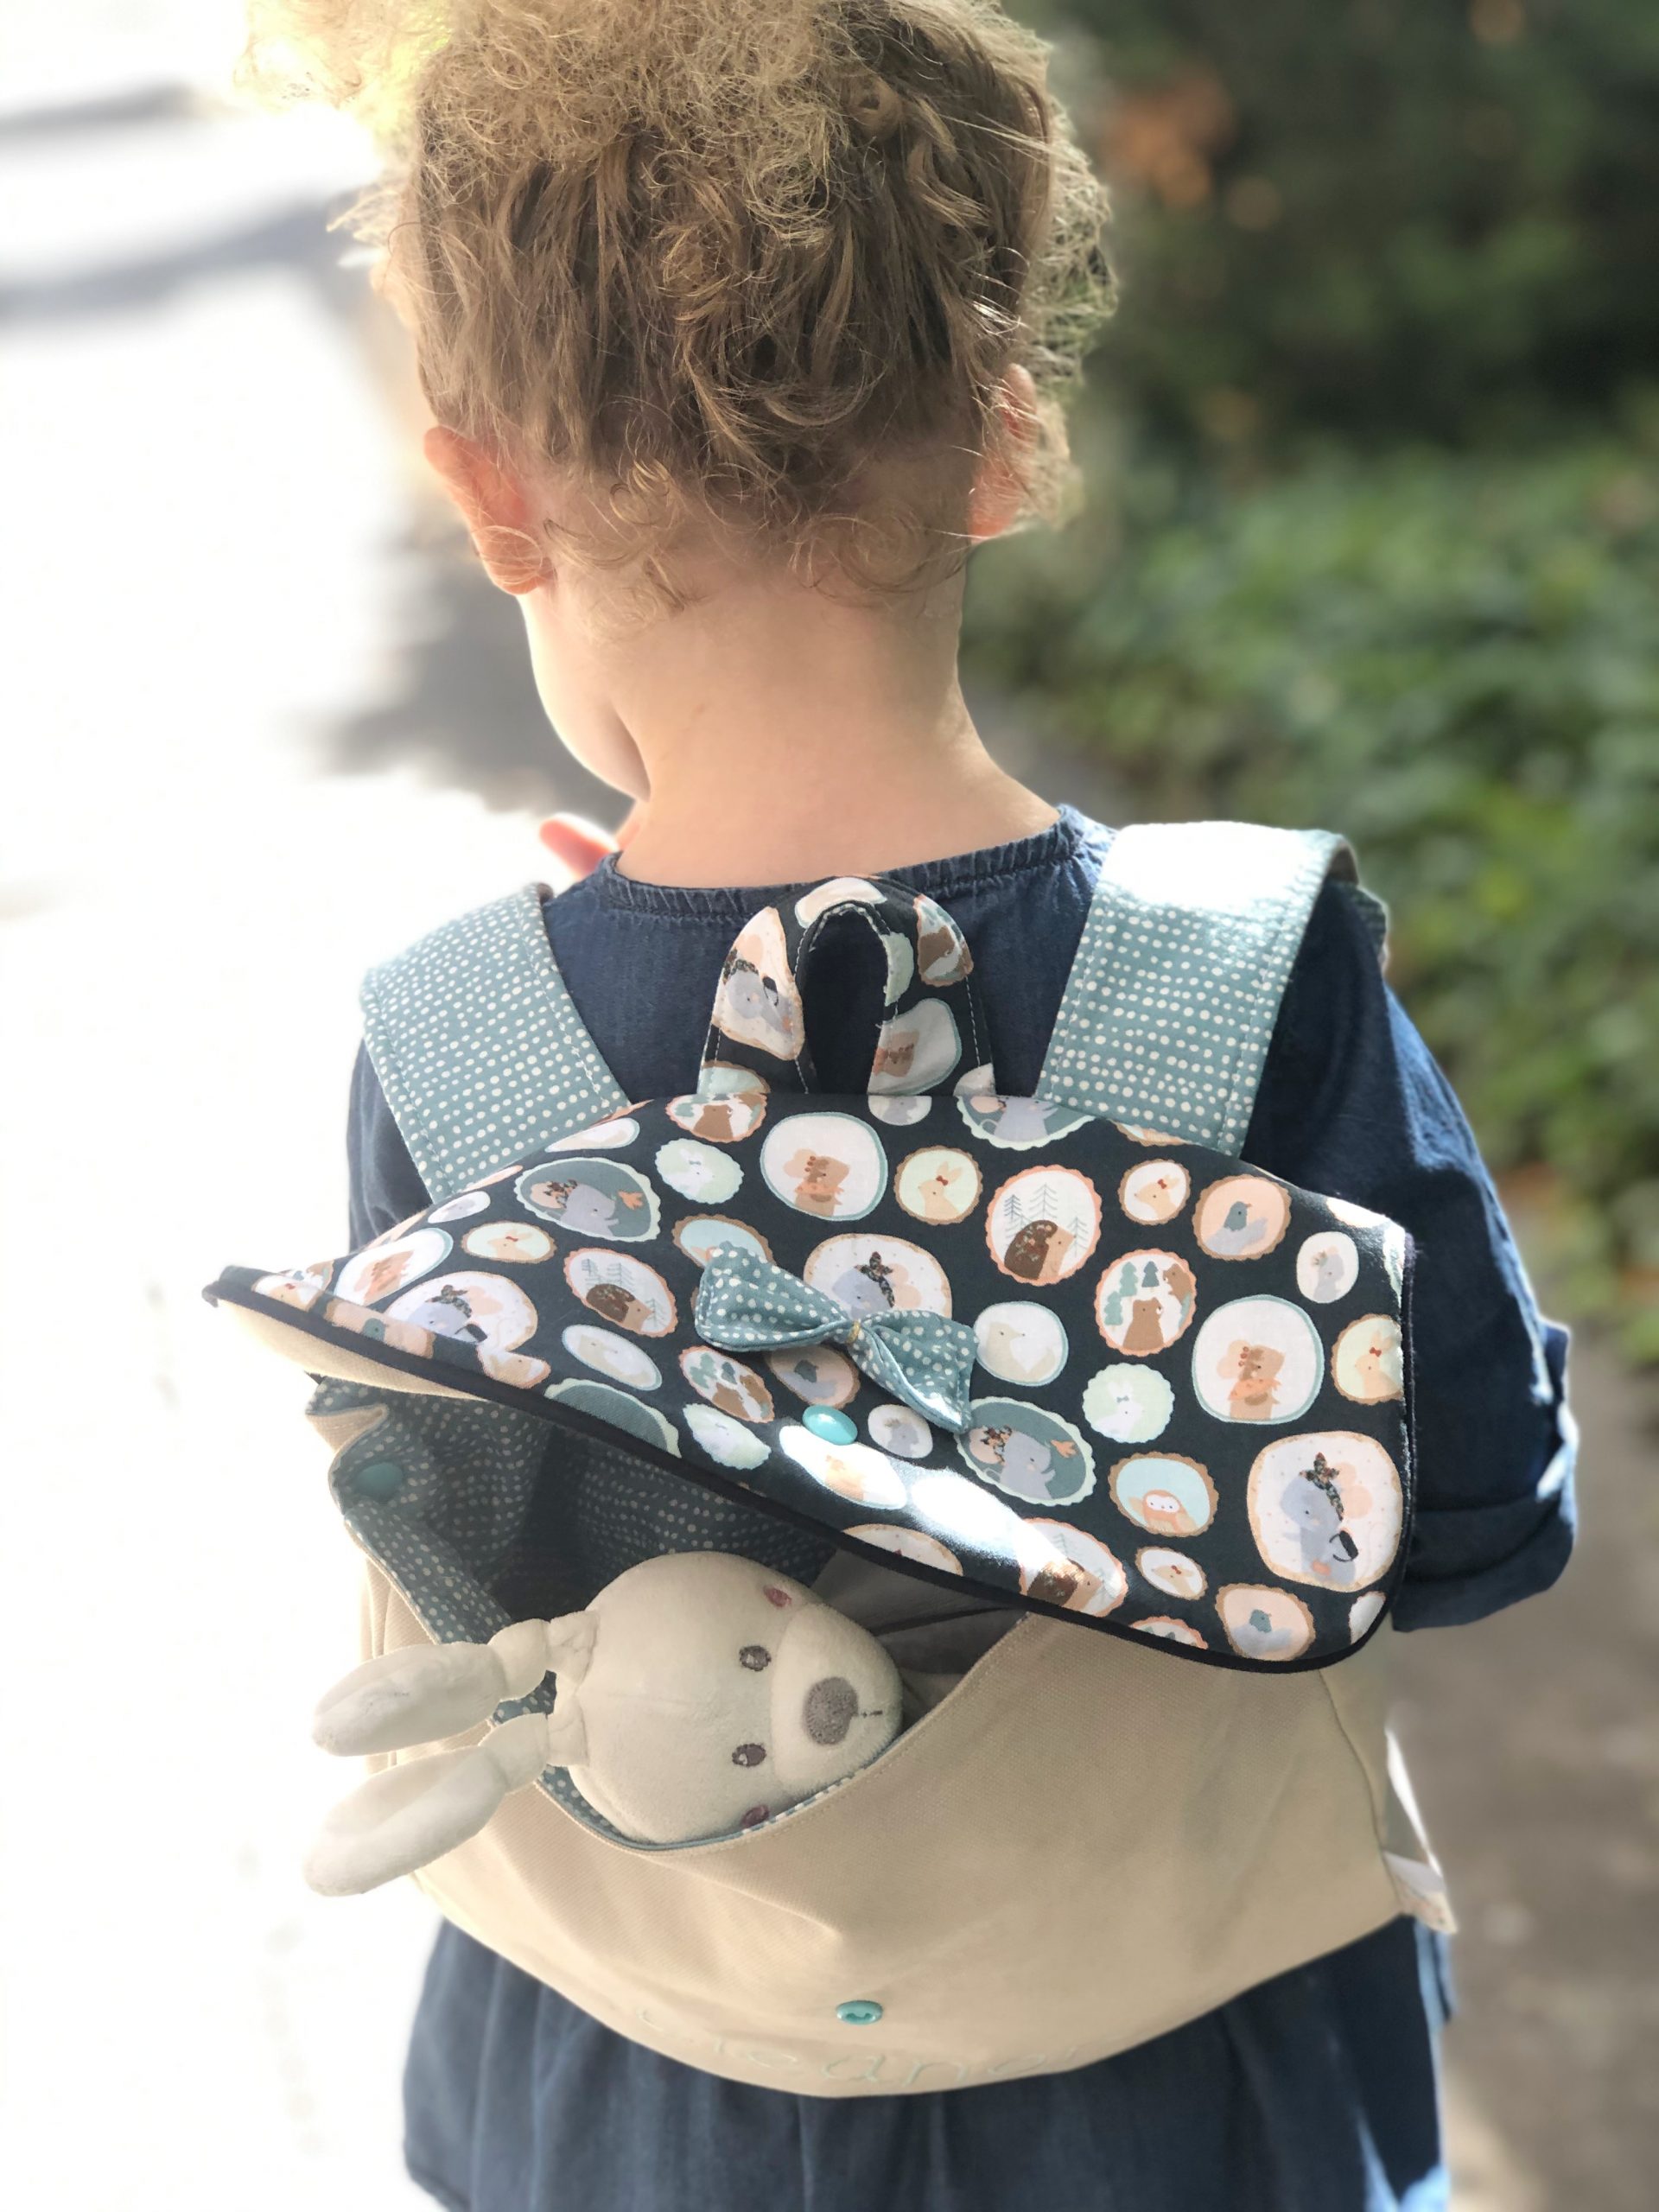 https://www.sewfrancisco.com/wp-content/uploads/2020/10/personalized-daycare-backpack-scaled.jpg